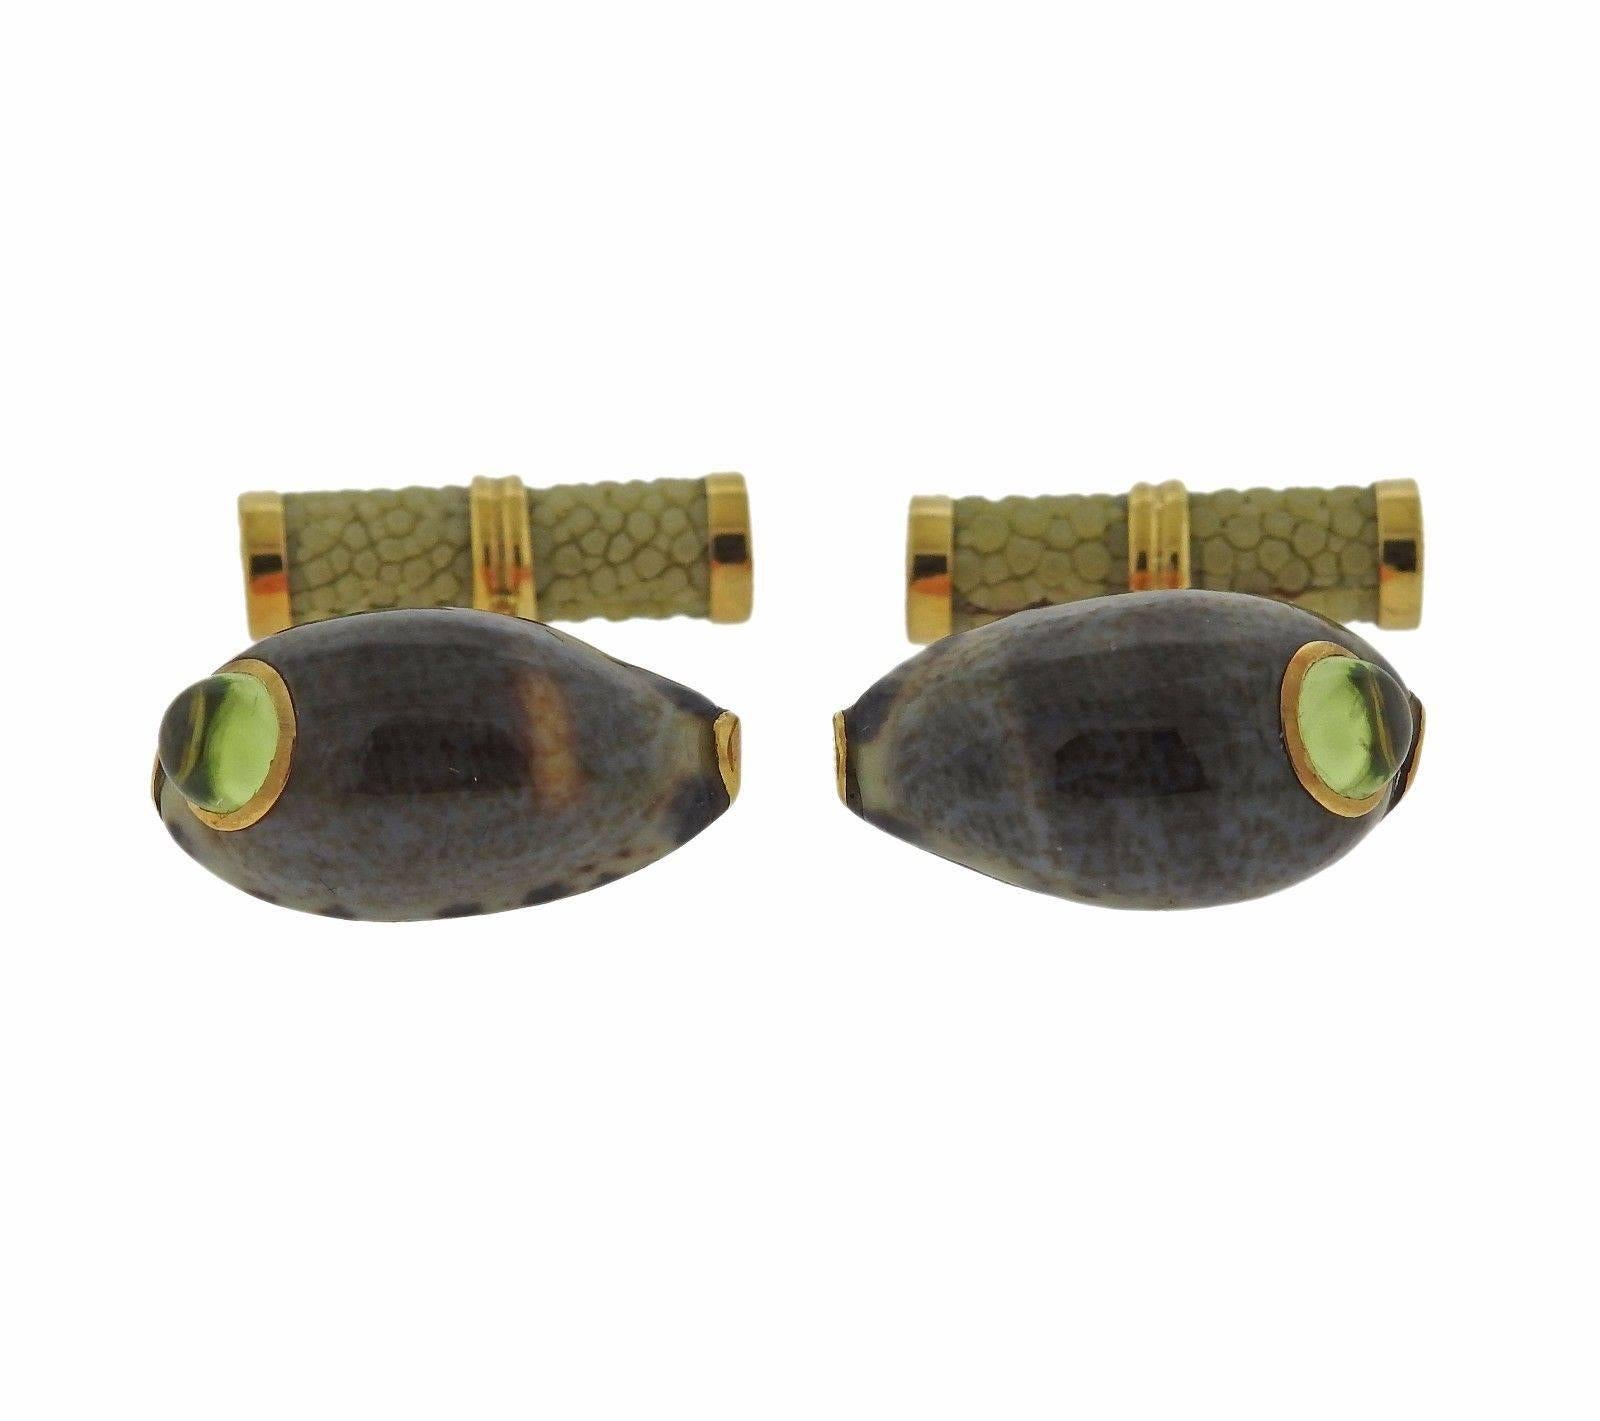 A pair of 18k yellow gold shell cufflinks set with peridot cabochons.  The shells measure 21mm x 12mm.  The weight of the set is 10.3 grams.  Marked: Trianon, 750, Trianon mark.